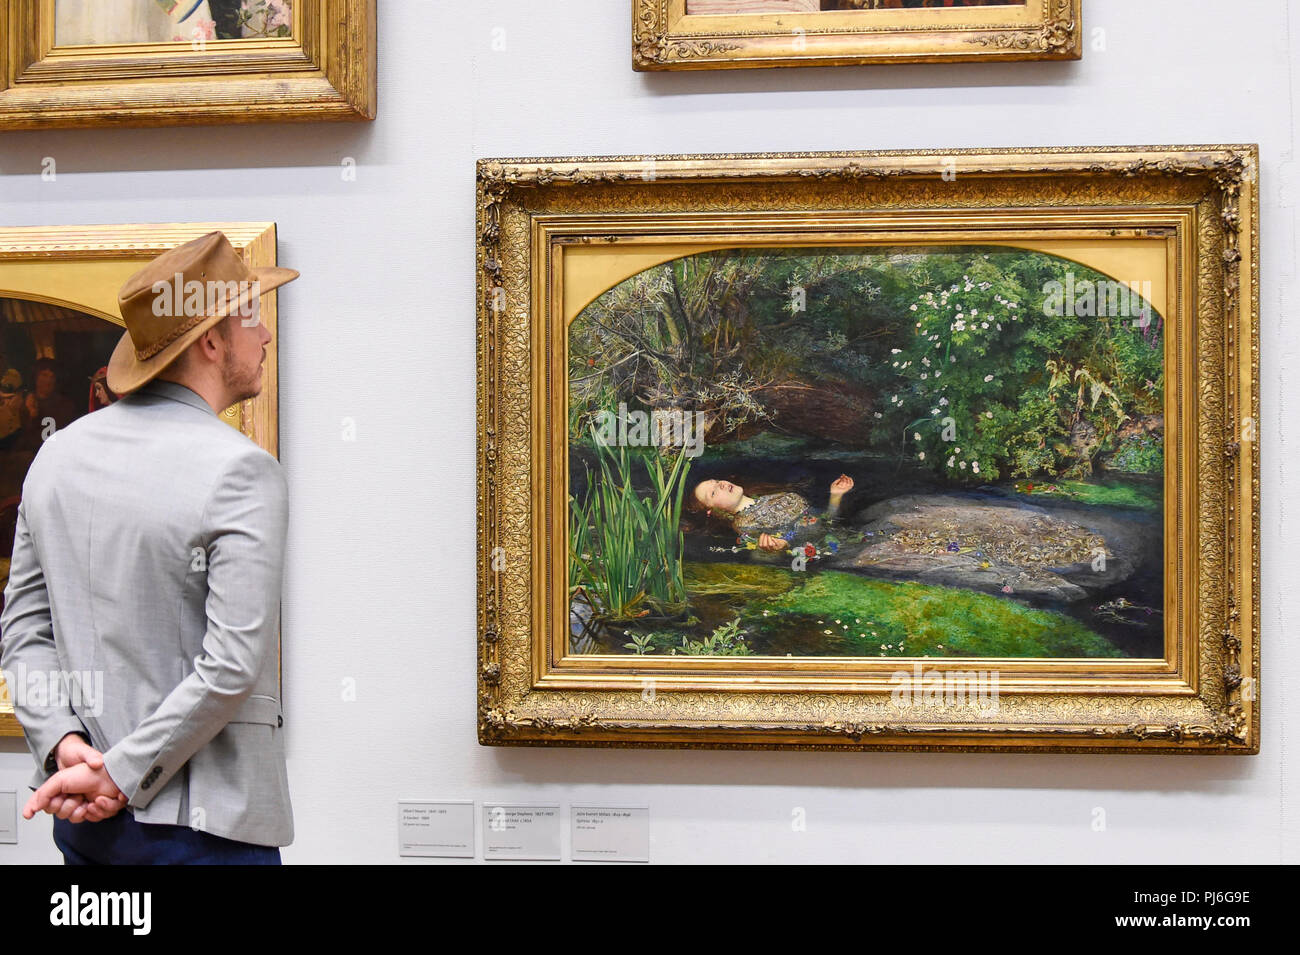 London, UK.  5 September 2018.  A visitor views 'Ophelia', 1851-52, by John Everett Millais, at Tate Britain, ahead of the launch of a major new exhibition at the National Gallery of Australia (NGA) in December 2018.  Over forty Pre-Raphaelite works will be loaned by Tate to NGA, which have never been shown in Australia until now, including 'Ophelia', 1851-52, by John Everett Millais and 'The Lady of Shalott', 1888, by John William Waterhouse. Credit: Stephen Chung / Alamy Live News Stock Photo